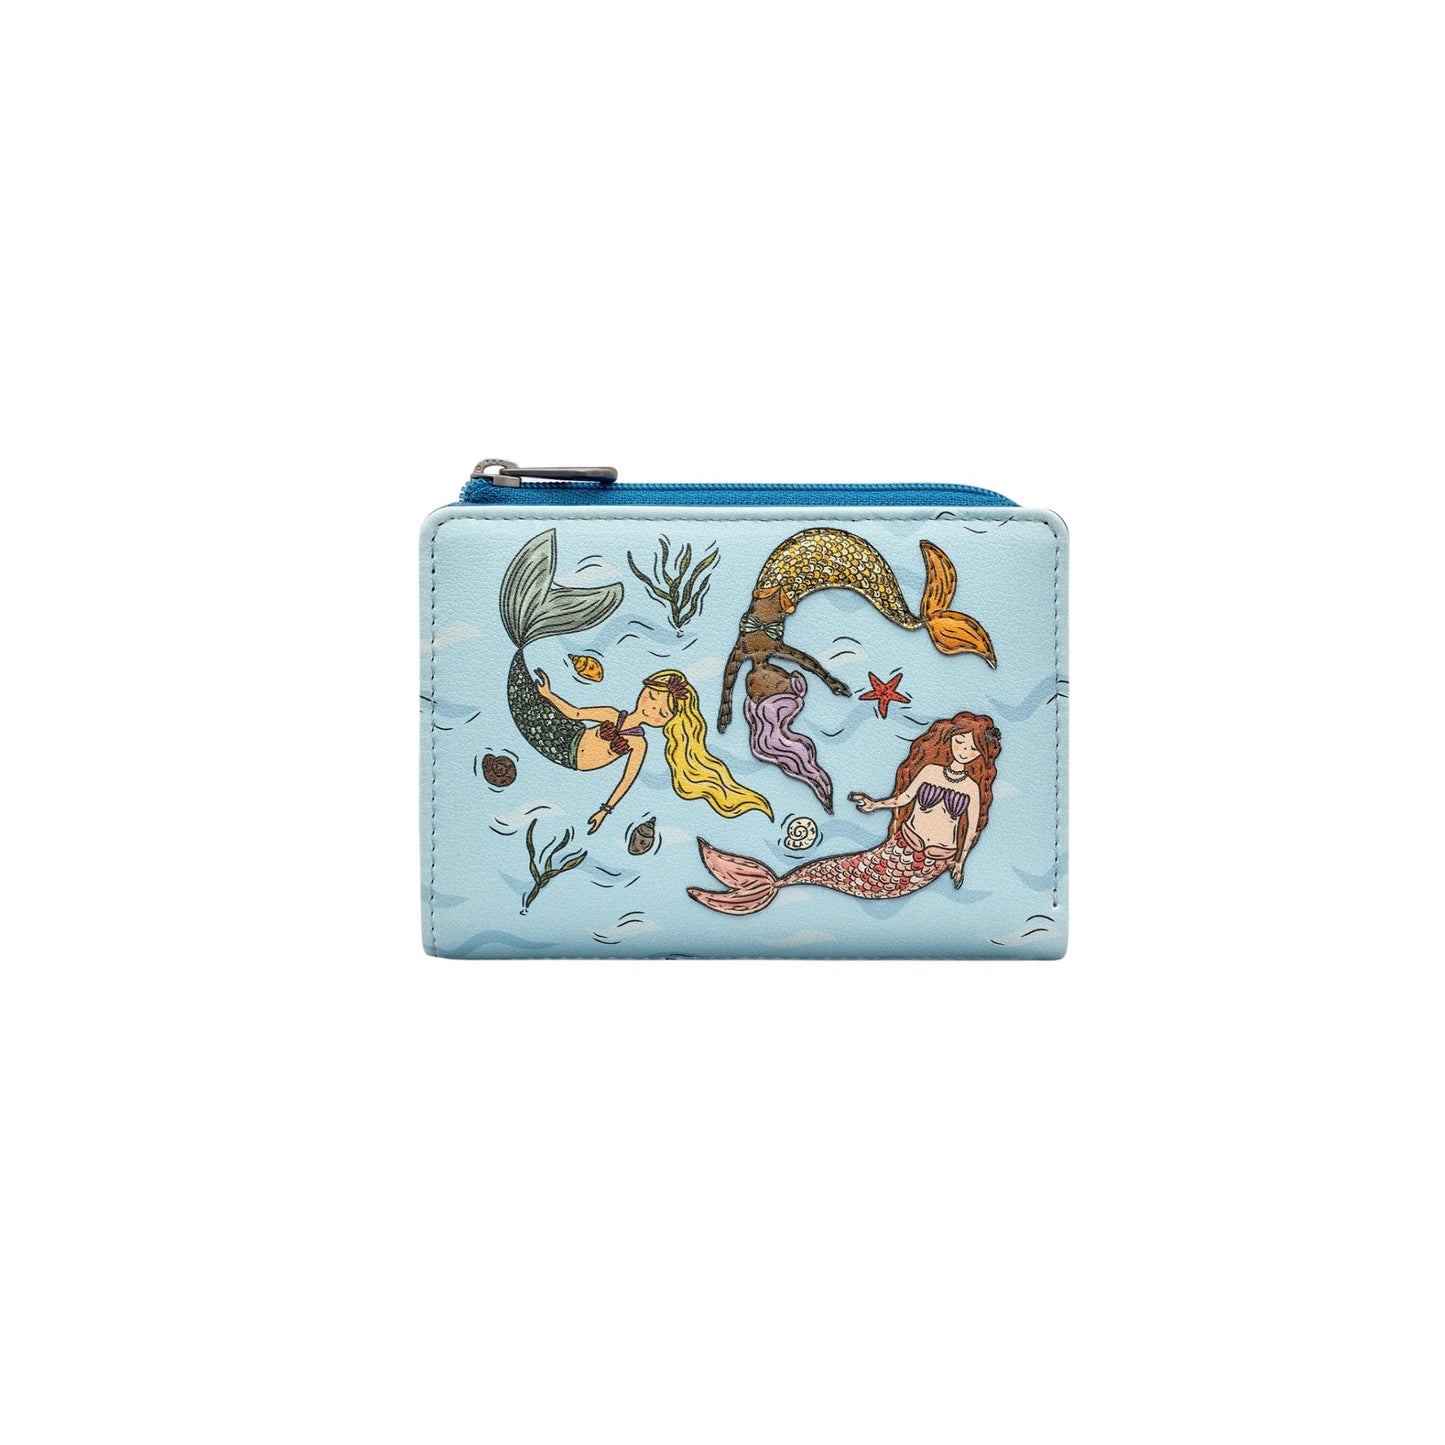 Mermaid's Dance Leather Flap Over Purse - Blue